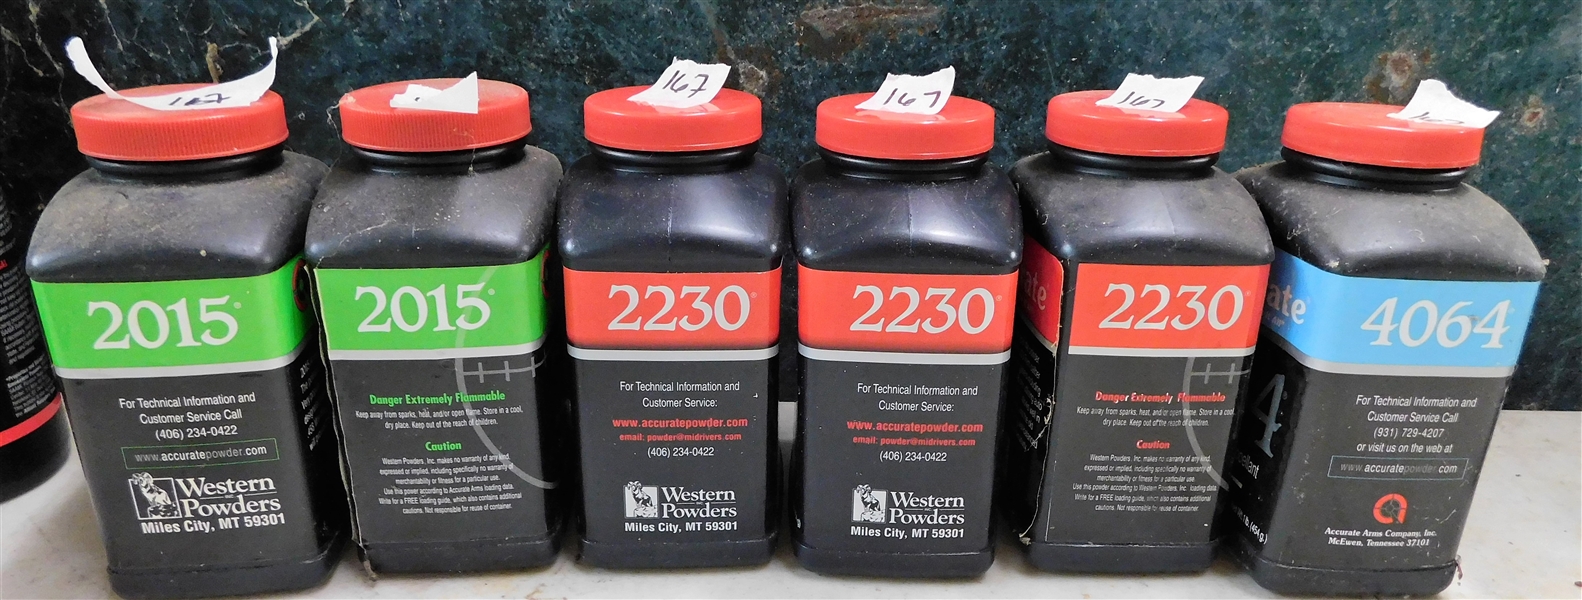 6 Unopened Canisters of Western Powders 2015, 2030, and 4064